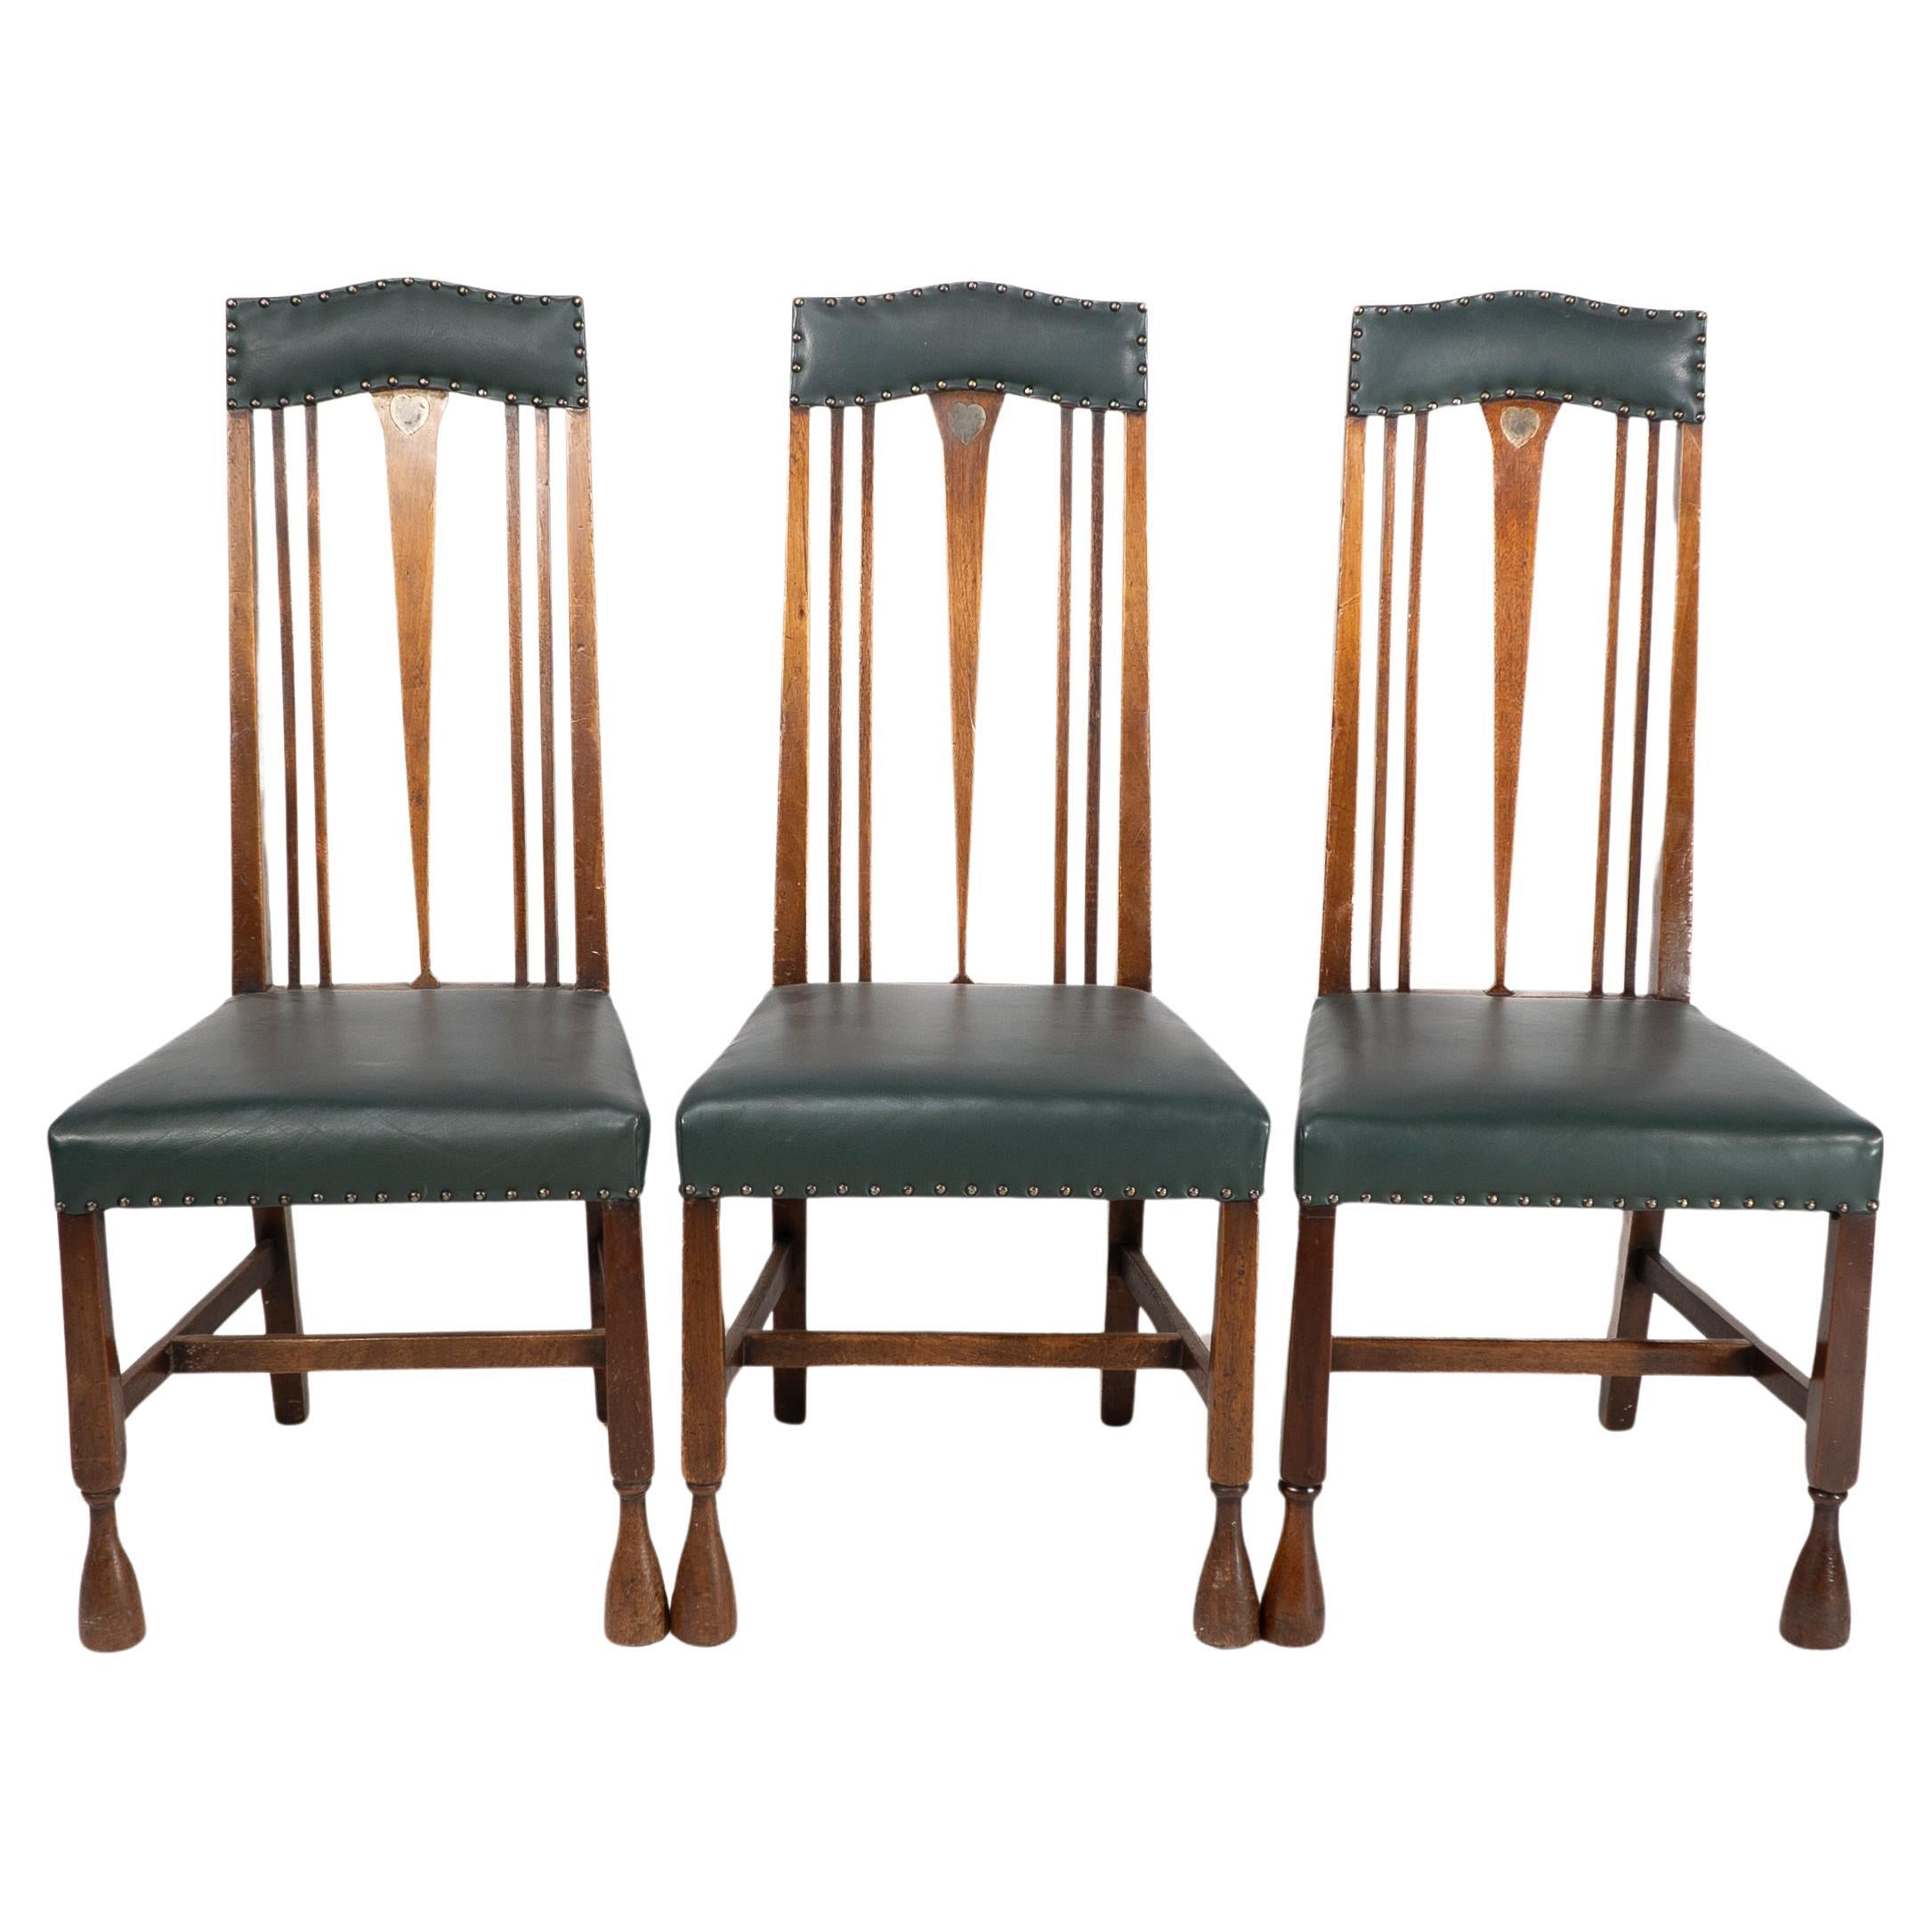 Liberty & Co. attr. Set of 3 dining chairs with Voysey style inlaid pewter heart